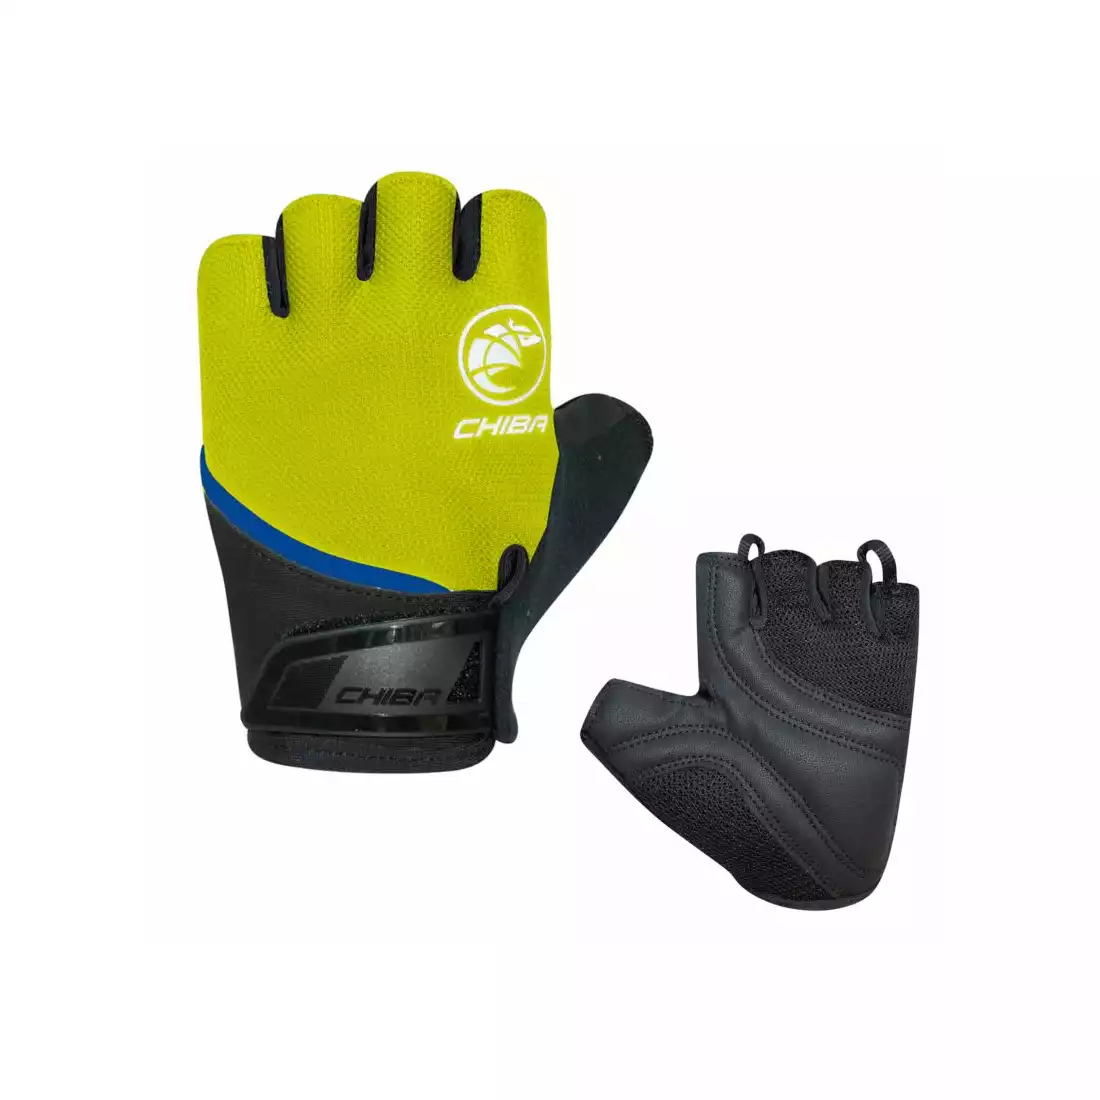 CHIBA YOUTH Children's cycling gloves, yellow